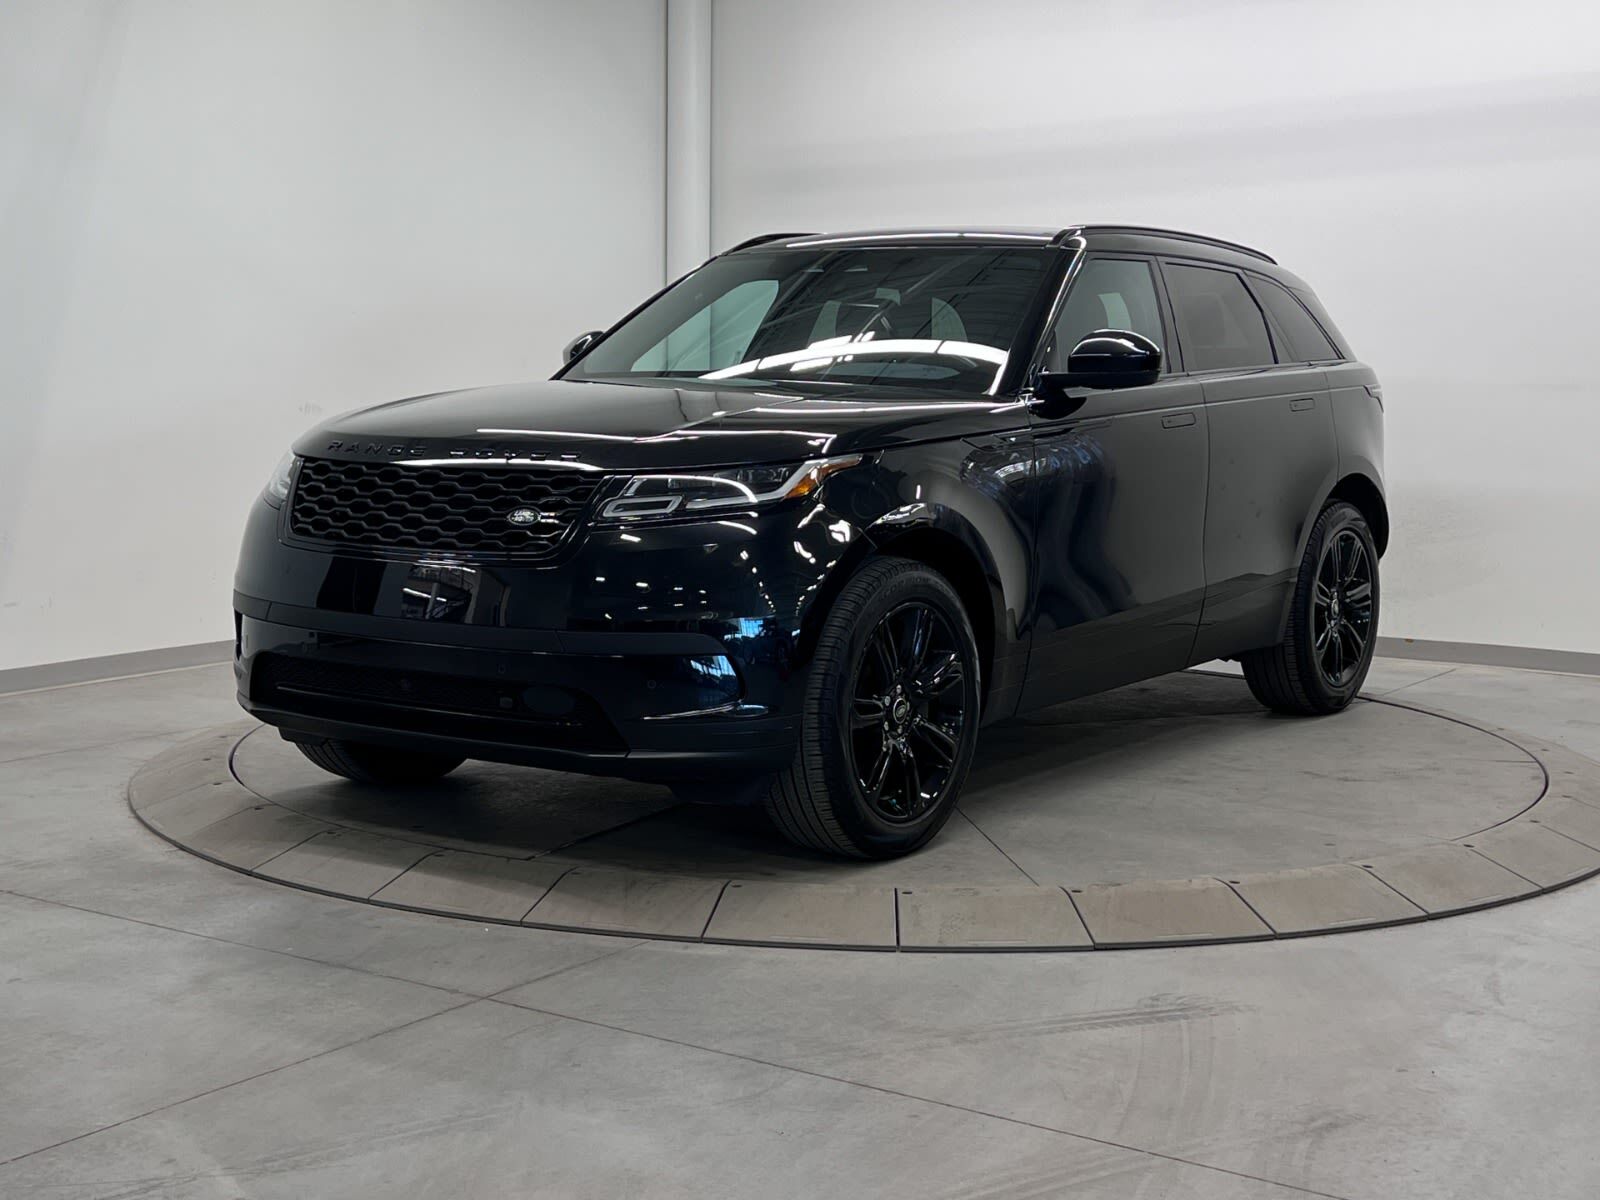 2022 Land Rover Range Rover Velar CERTIFIED PRE OWNED RATES AS LOW AS 5.99%